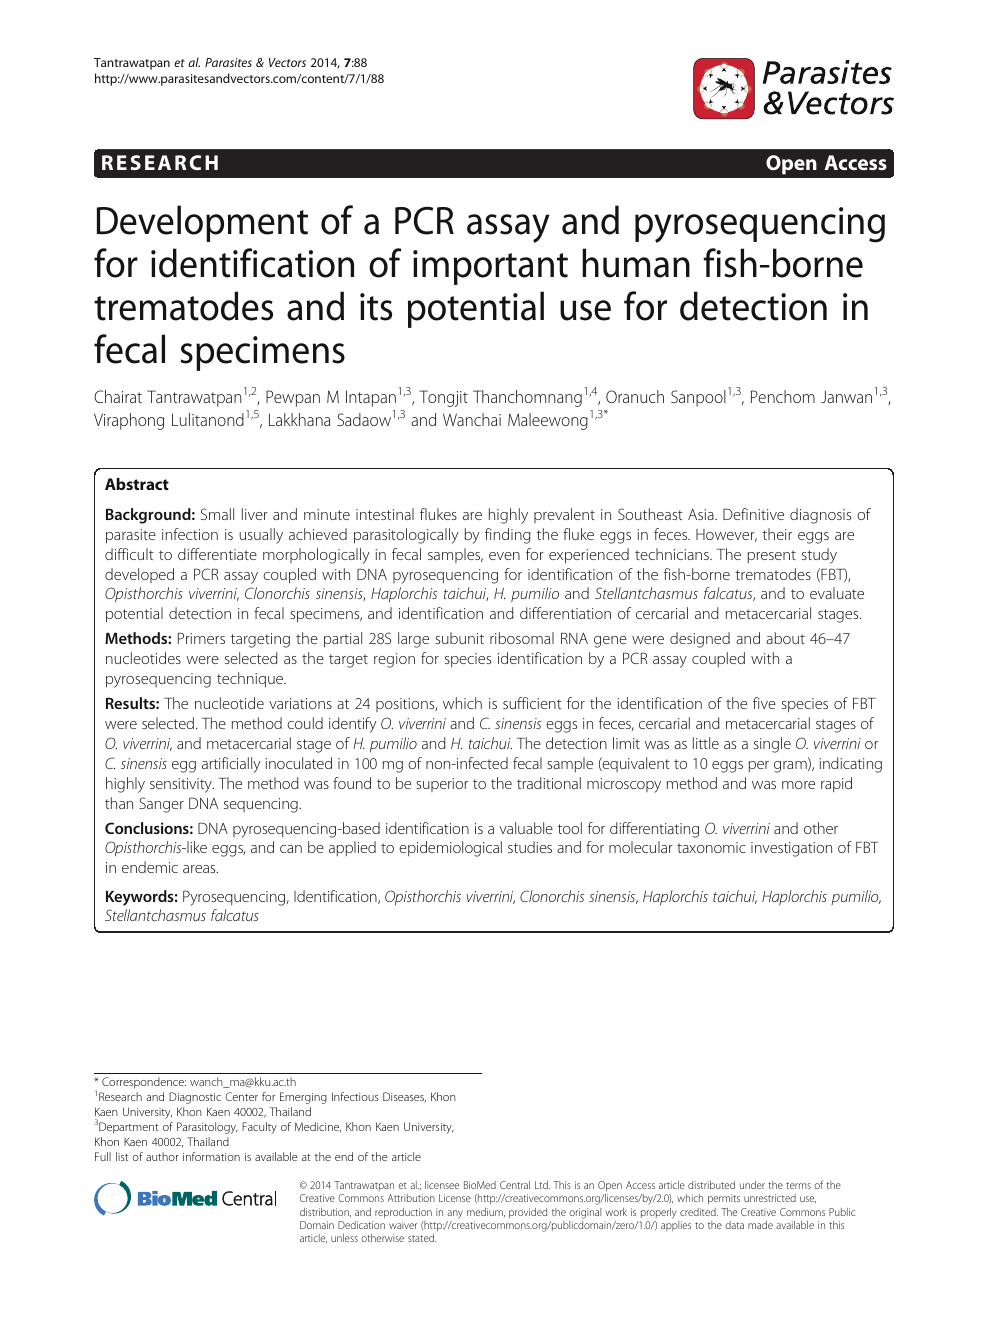 Development Of A Pcr Assay And Pyrosequencing For Identification Of Important Human Fish Borne Trematodes And Its Potential Use For Detection In Fecal Specimens Topic Of Research Paper In Veterinary Science Download